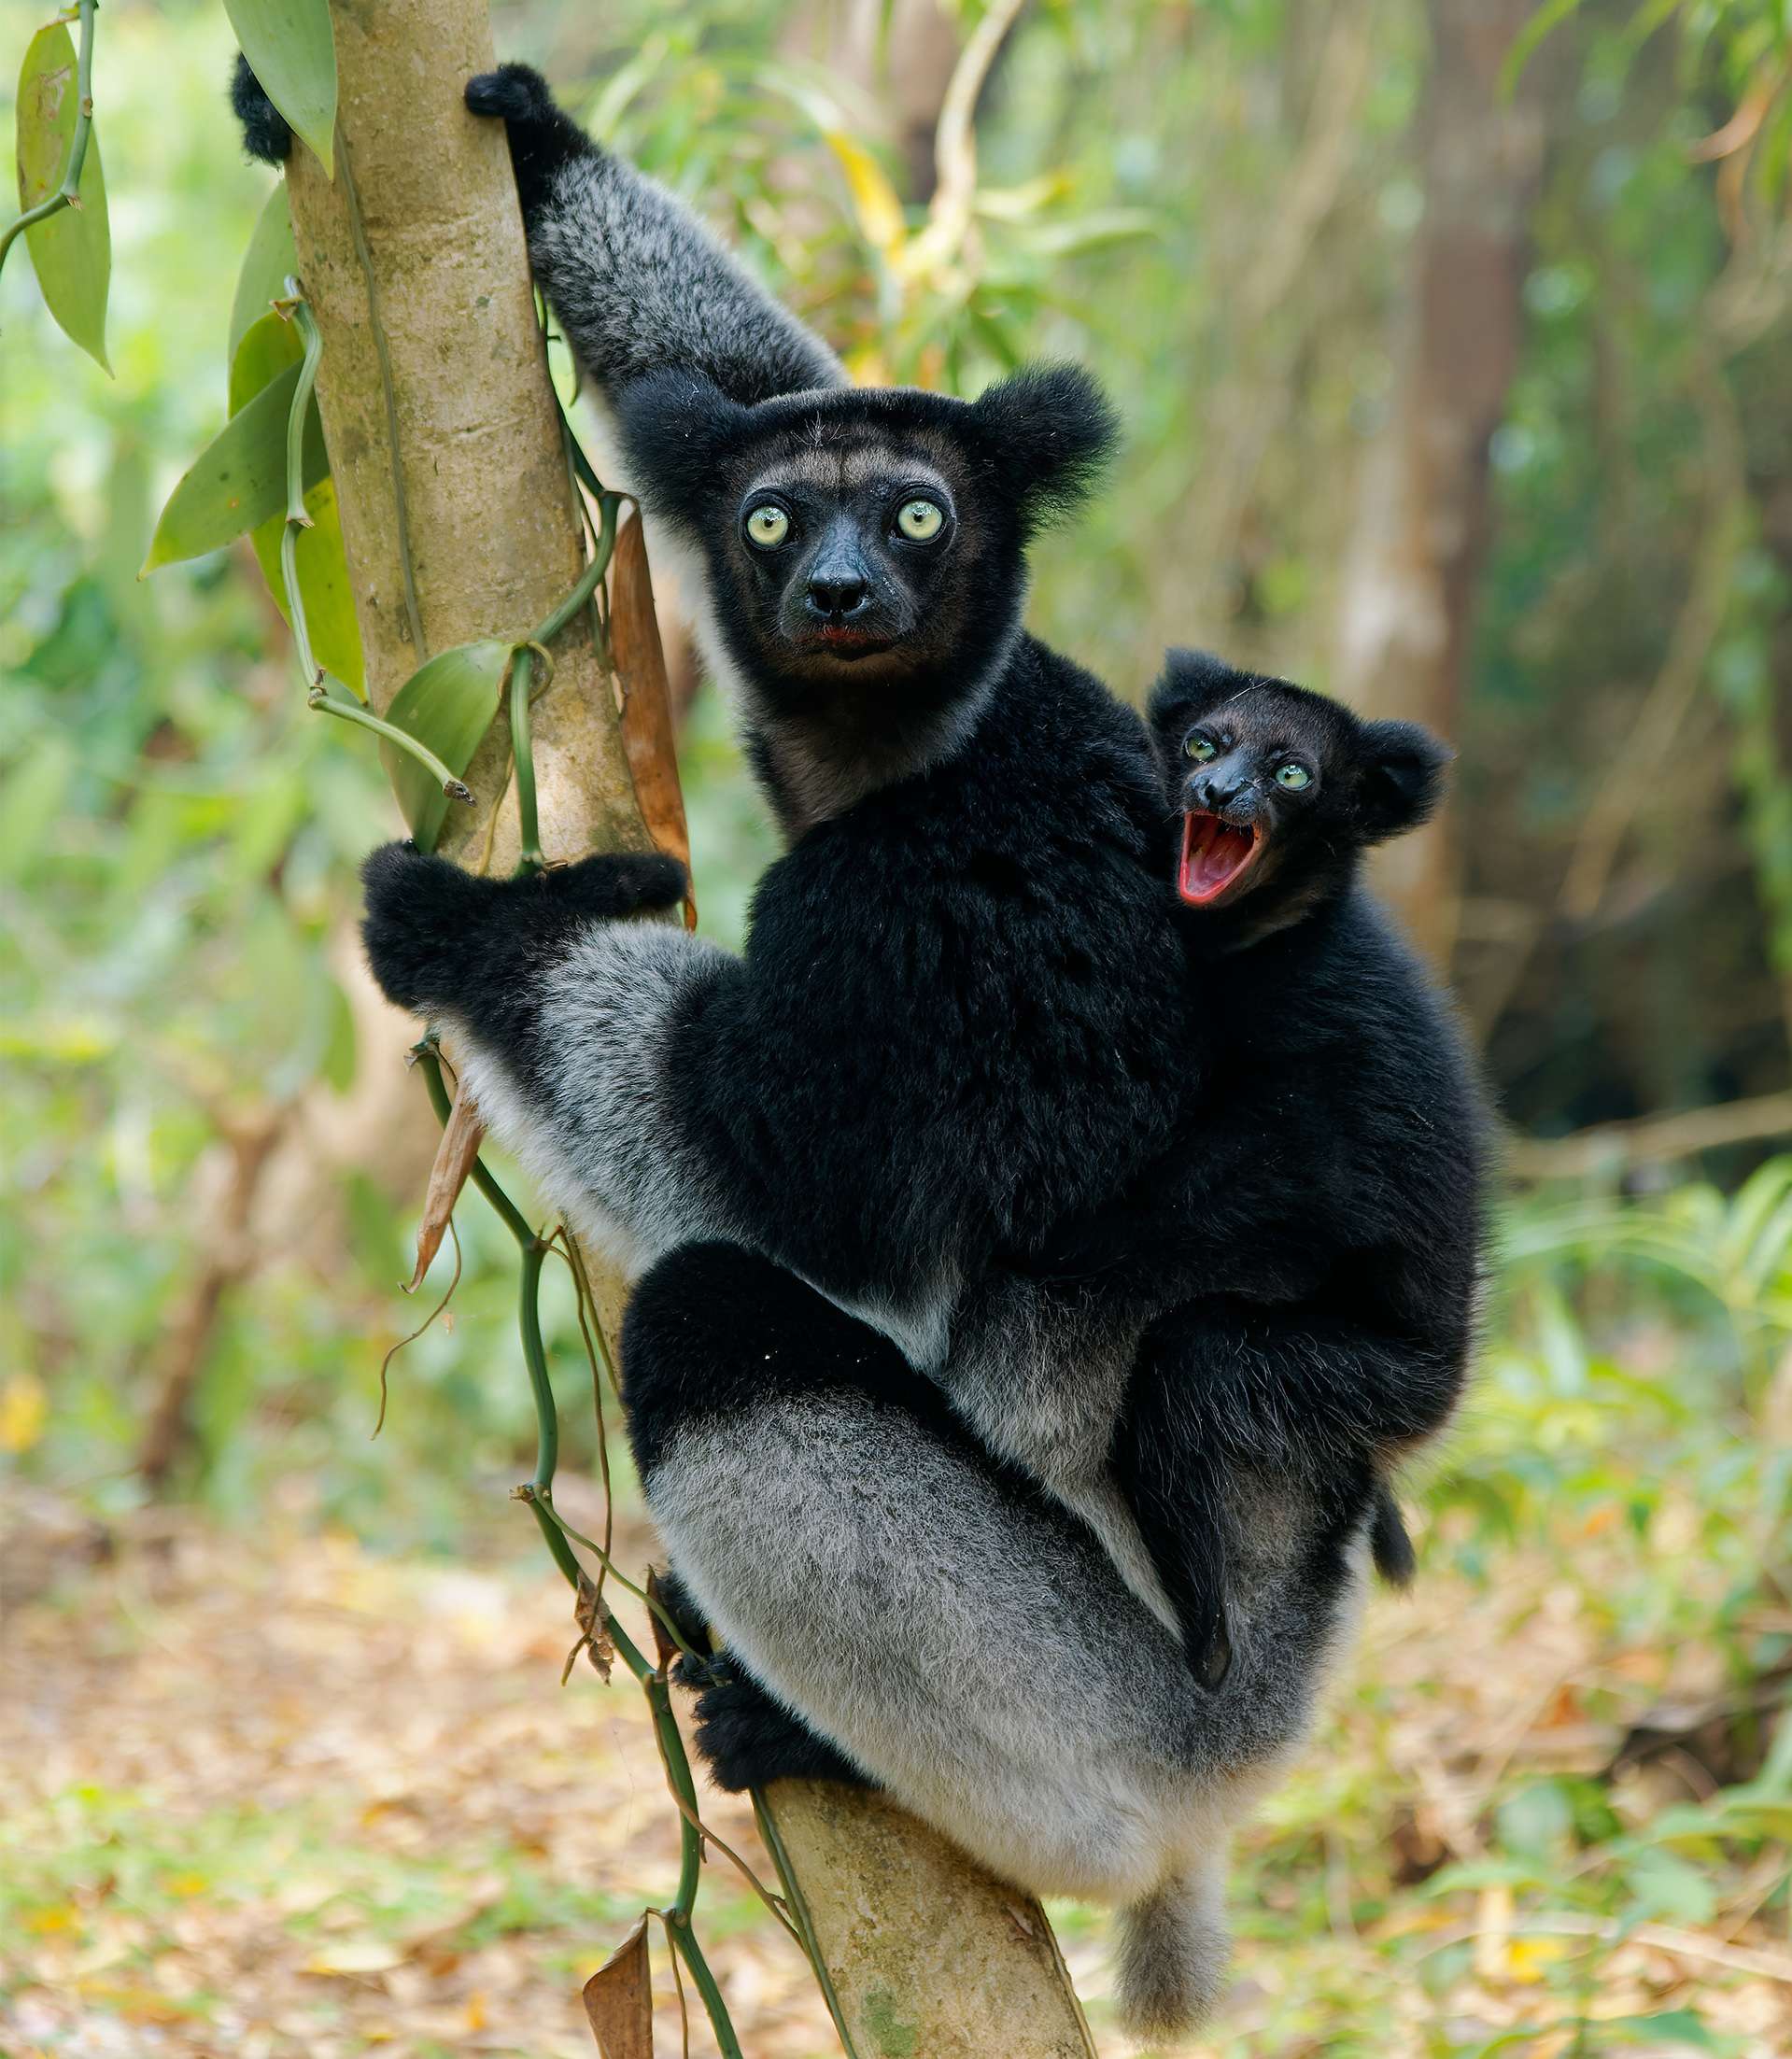 Indri indri with smiling baby - Babakoto the largest lemur of Madagascar has a black and white coat, climbing or clinging, moving through the canopy, herbivorous, feeding on leaves.